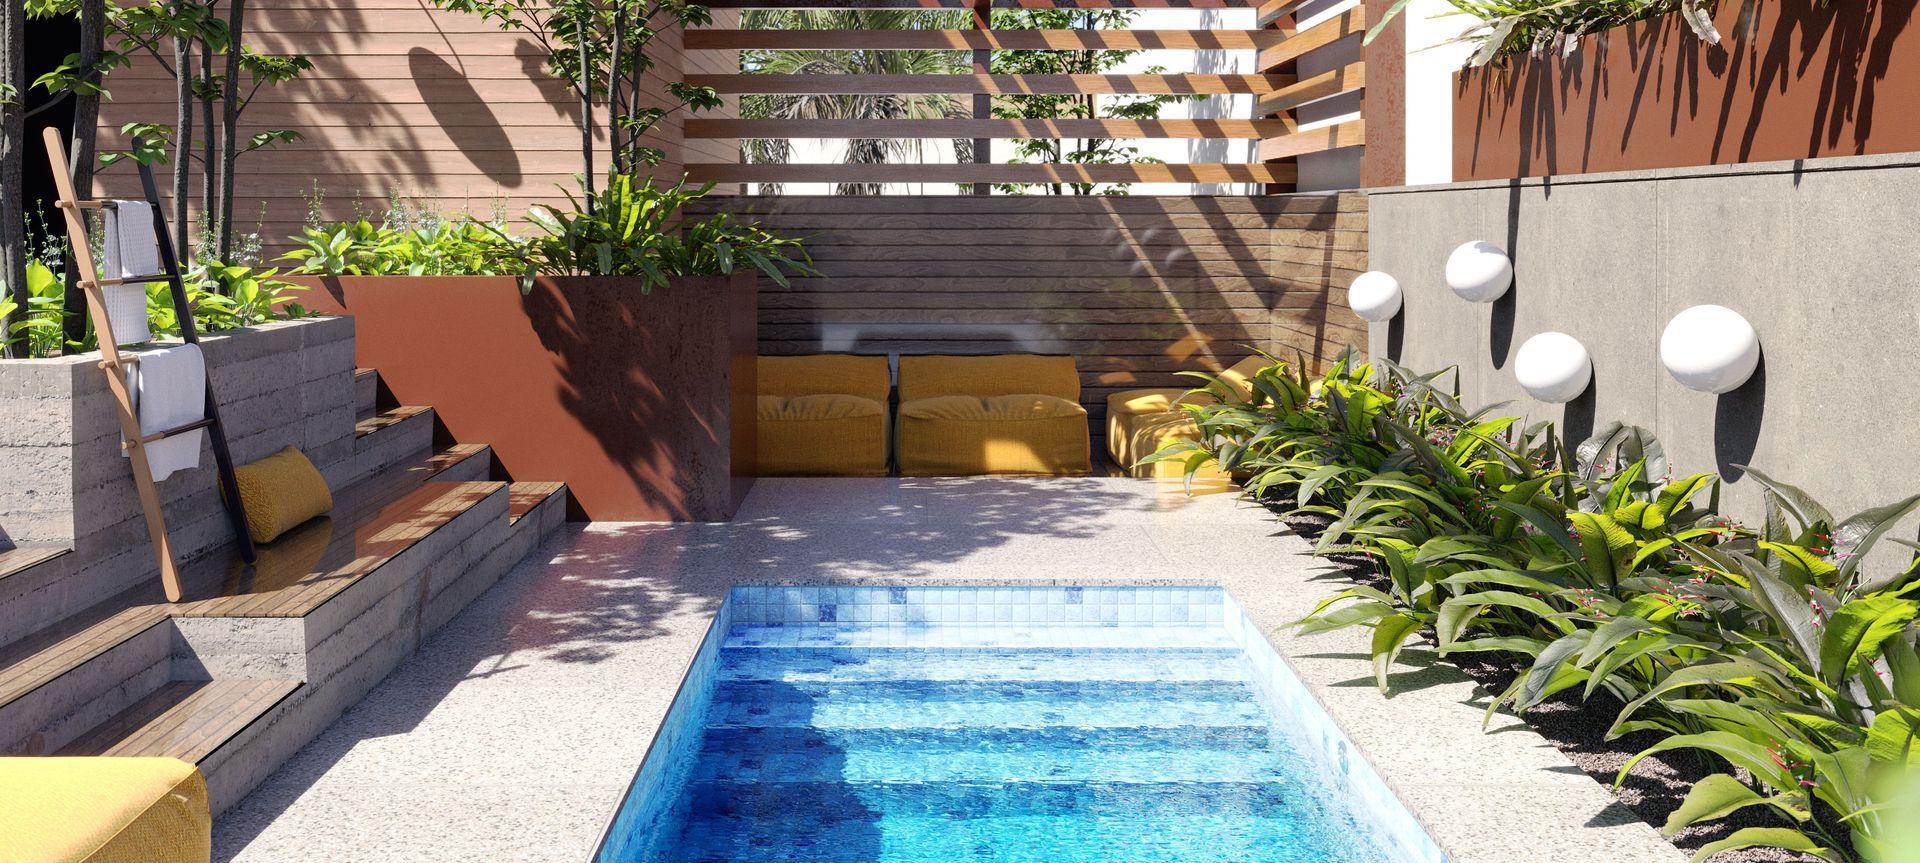 Poolpac offer fully tiled plunge pools at an affordable price.